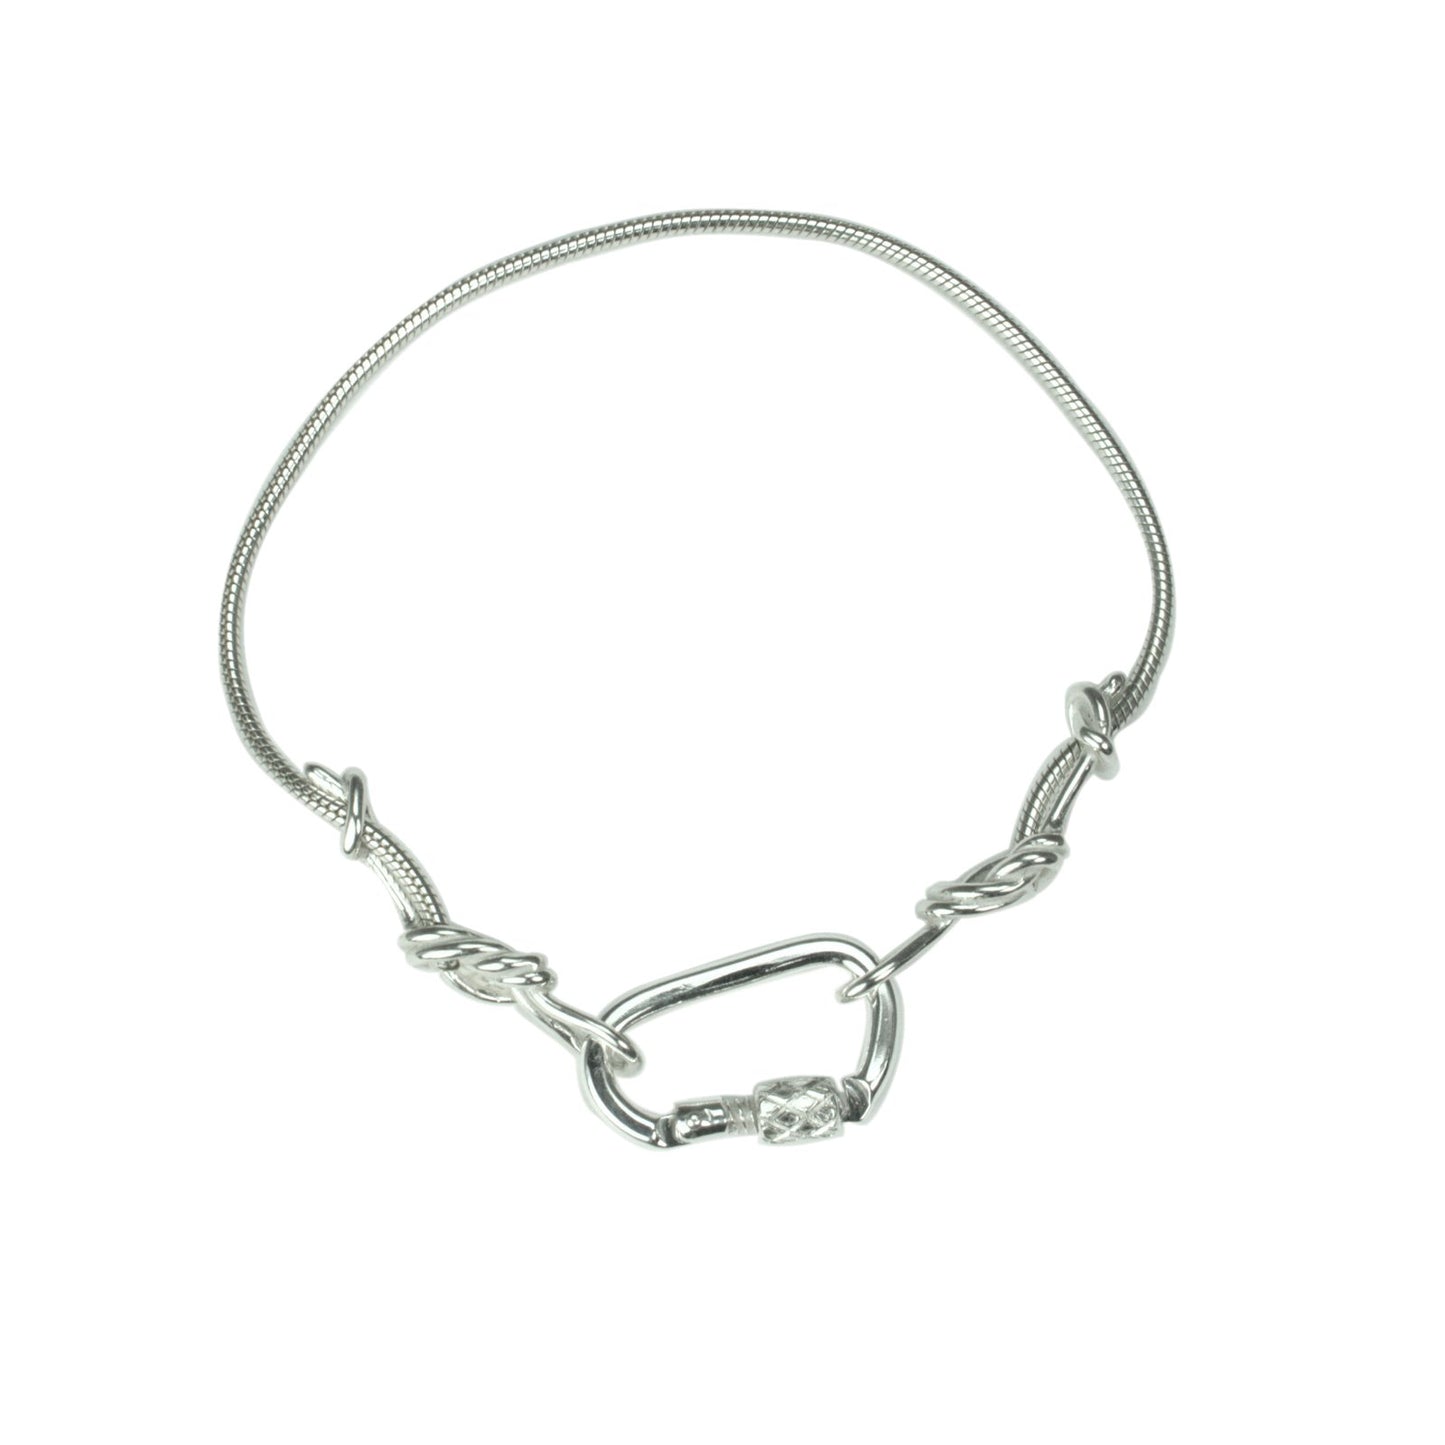 Climbing Rope Chain Bracelet - Handmade in sterling silver - Showing figure 8 ends and carabiner